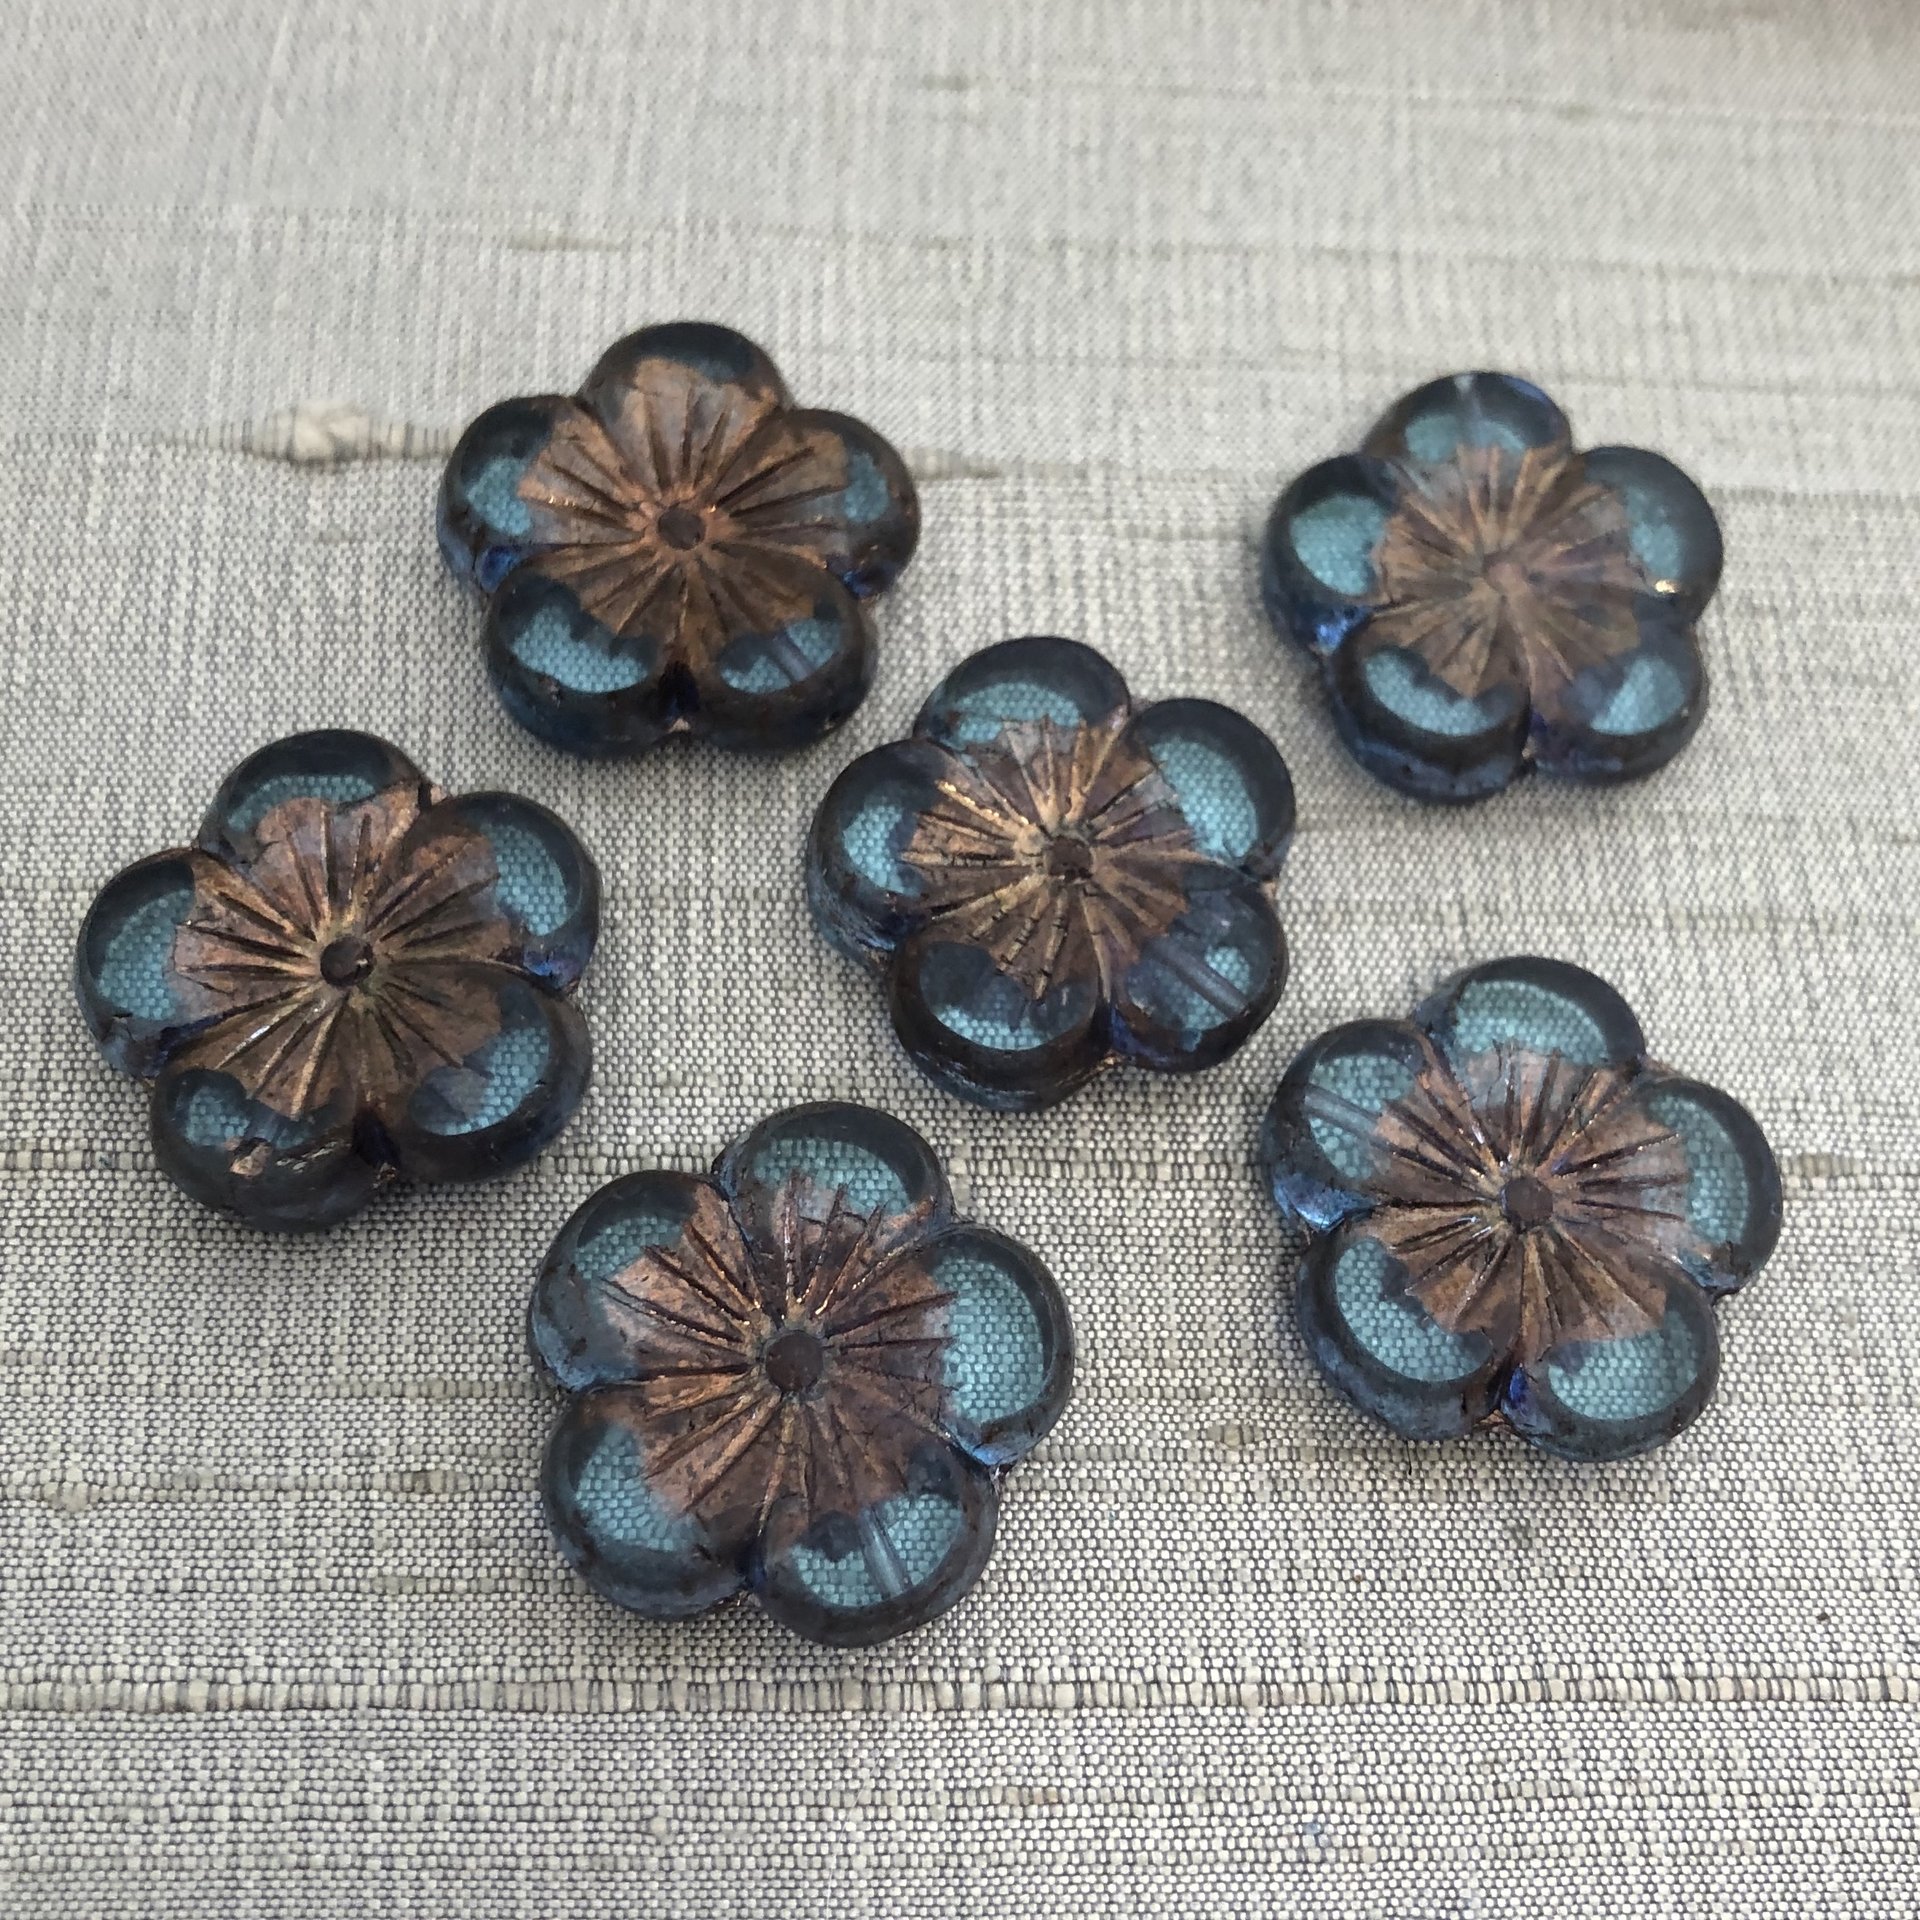 22mm Hibiscus Flower Pale Blue with a Copper Finish - 1 Bead